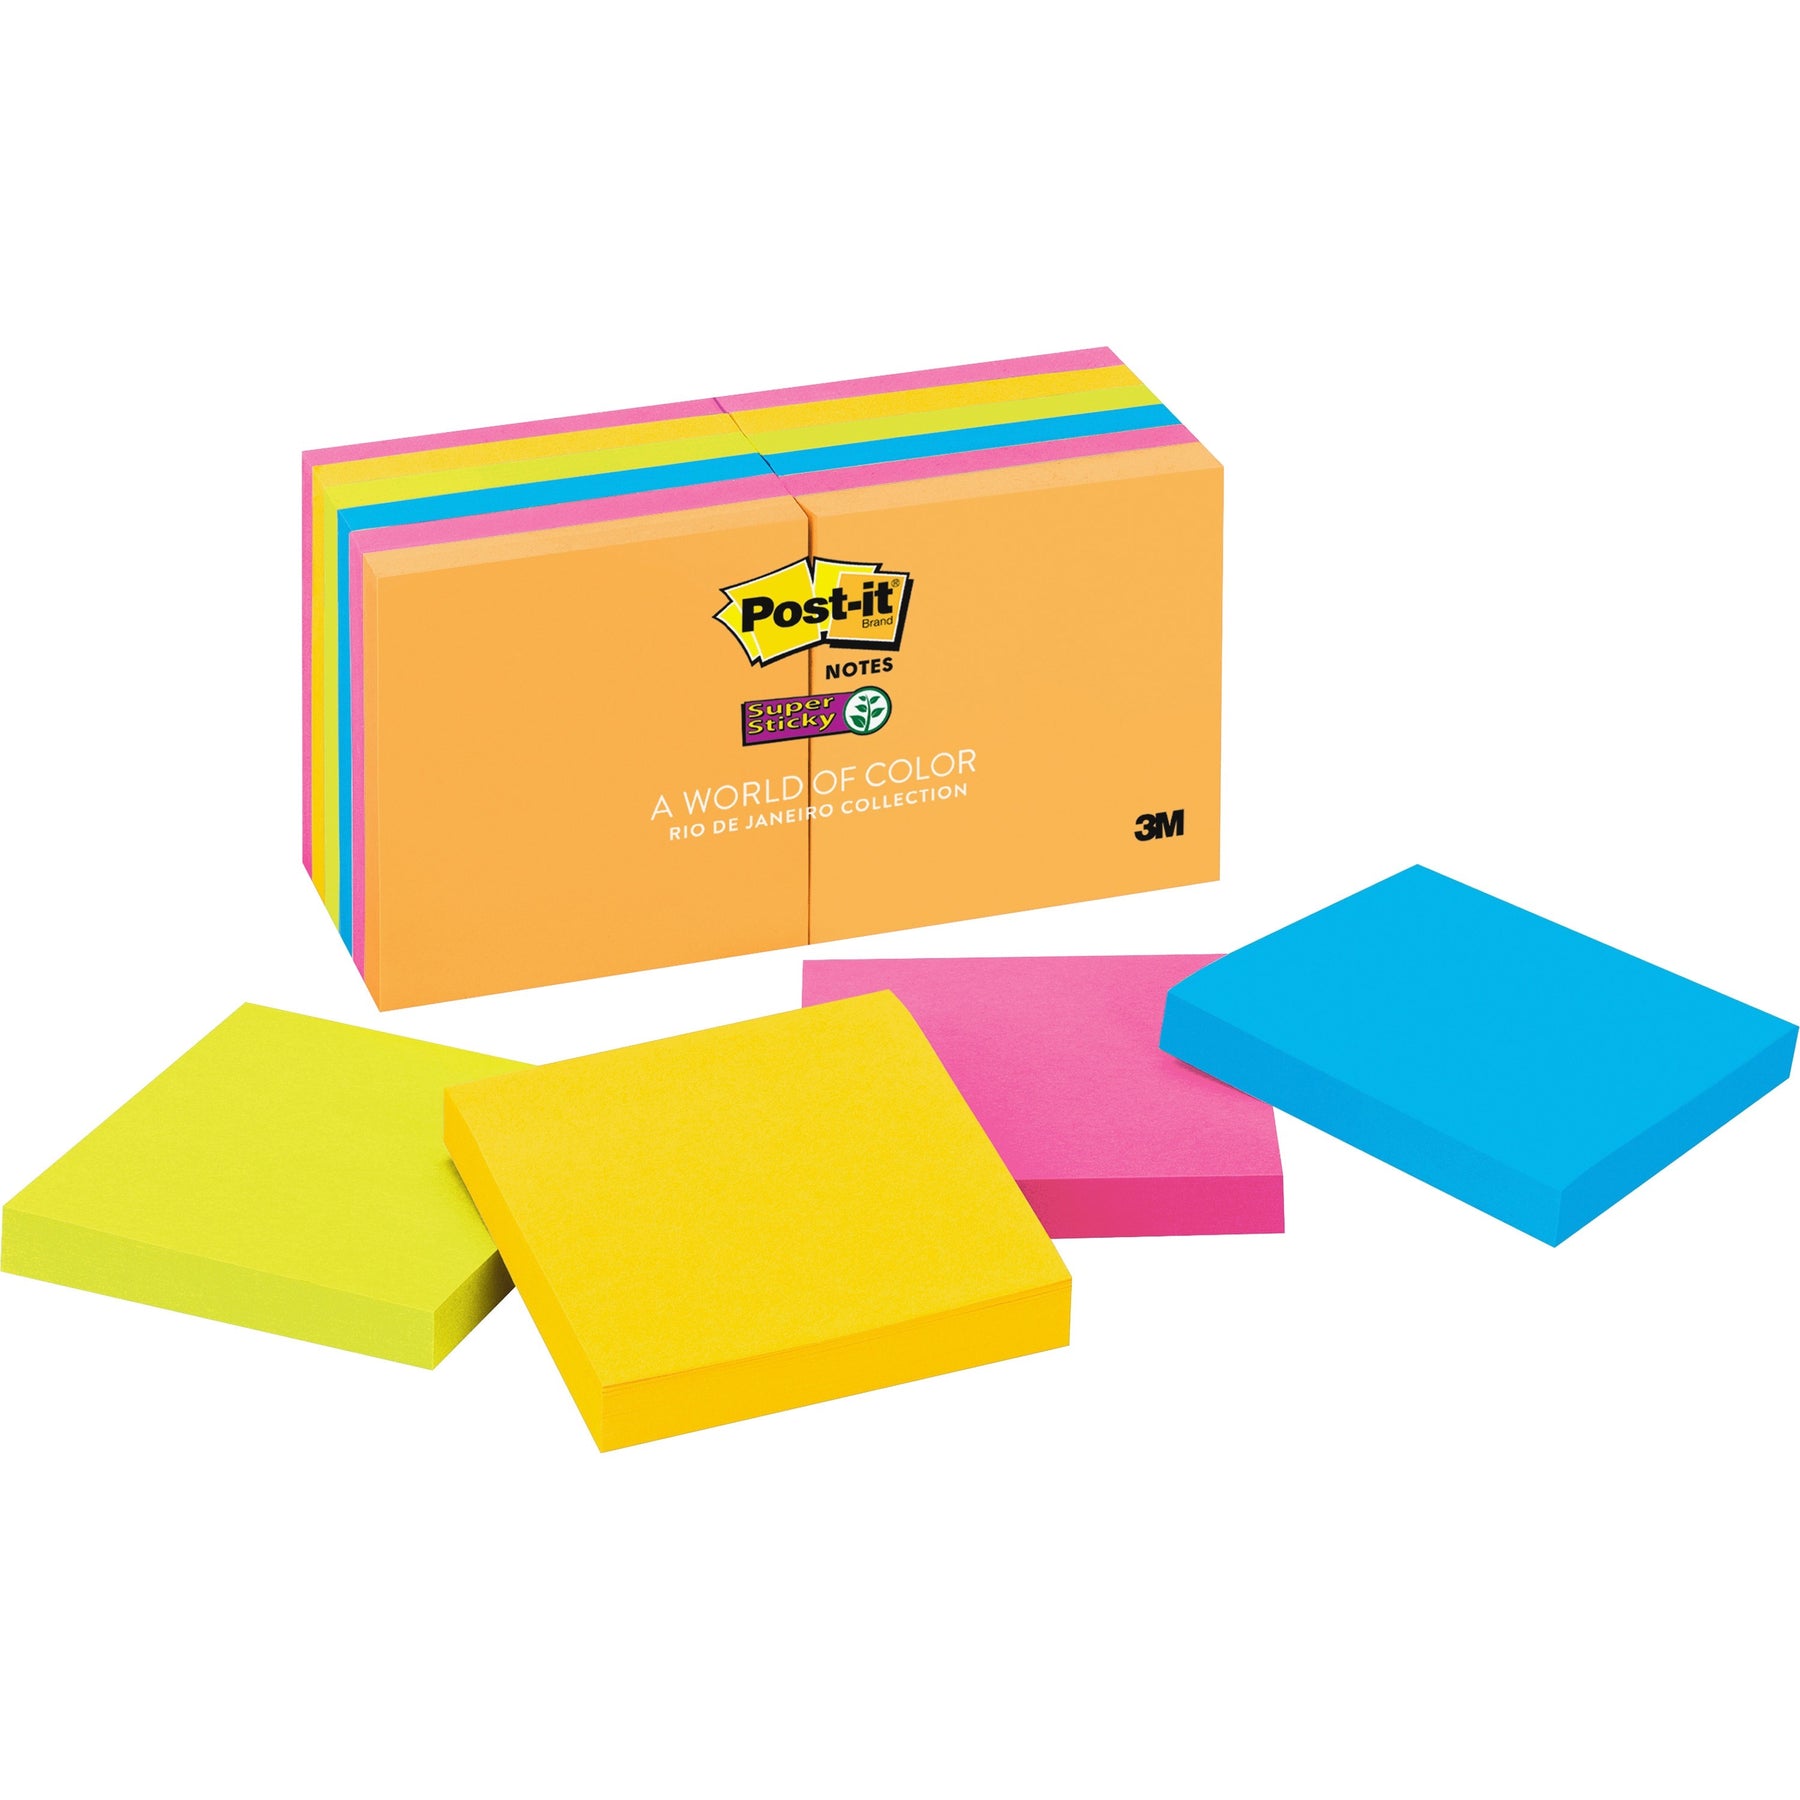 Post-it® Super Sticky Notes Rio de Janeiro Collection Pack, 5 ct